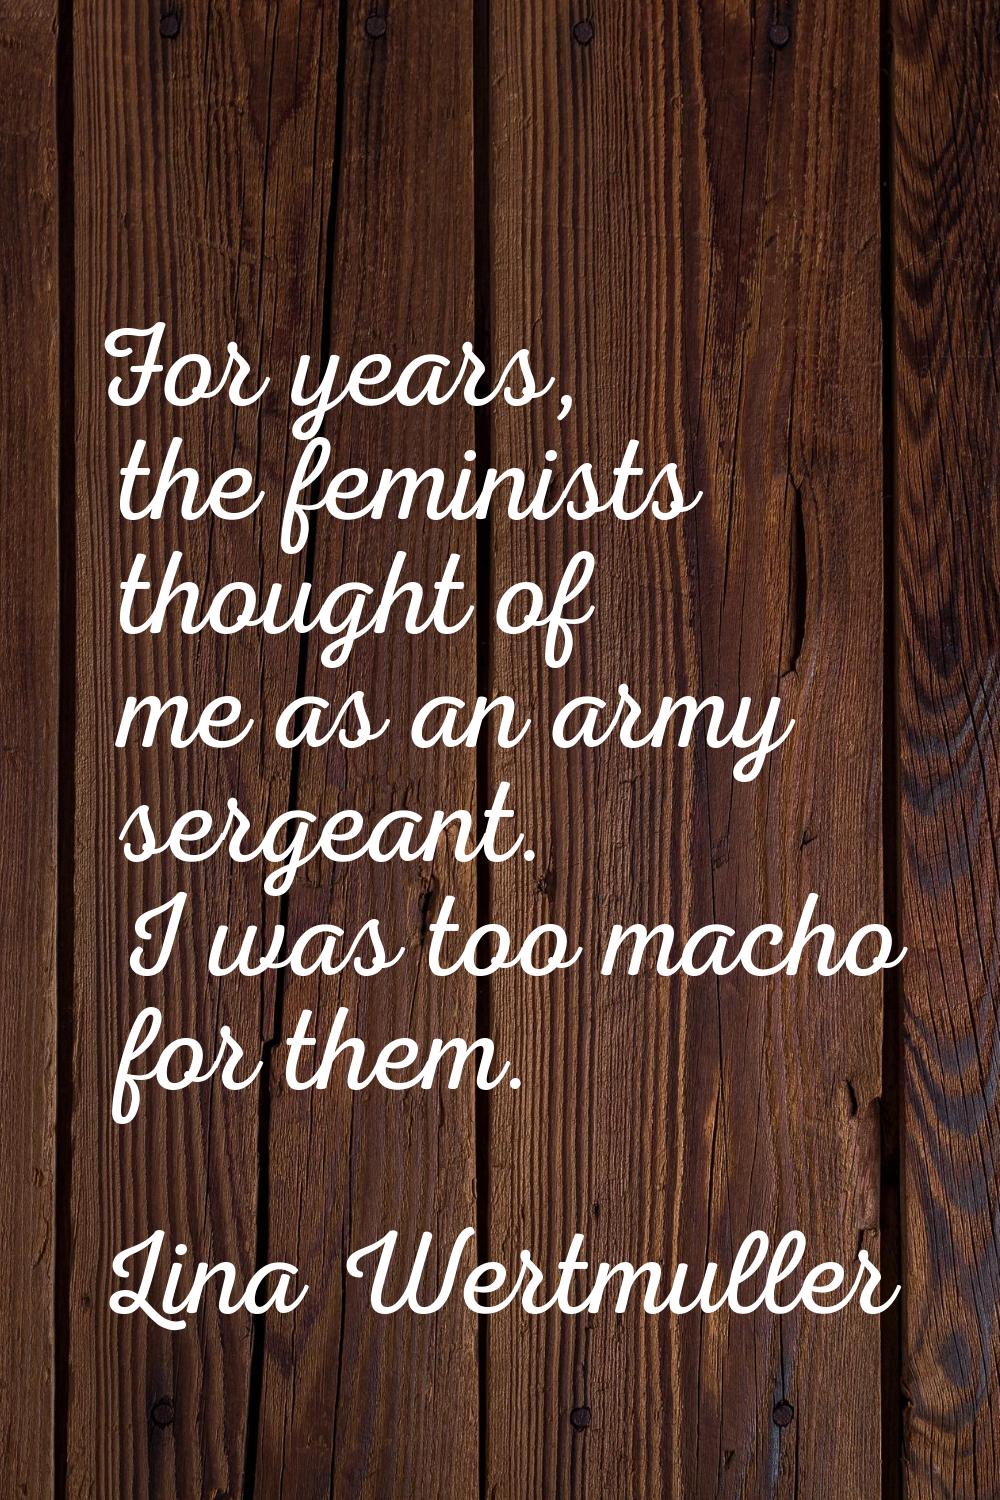 For years, the feminists thought of me as an army sergeant. I was too macho for them.